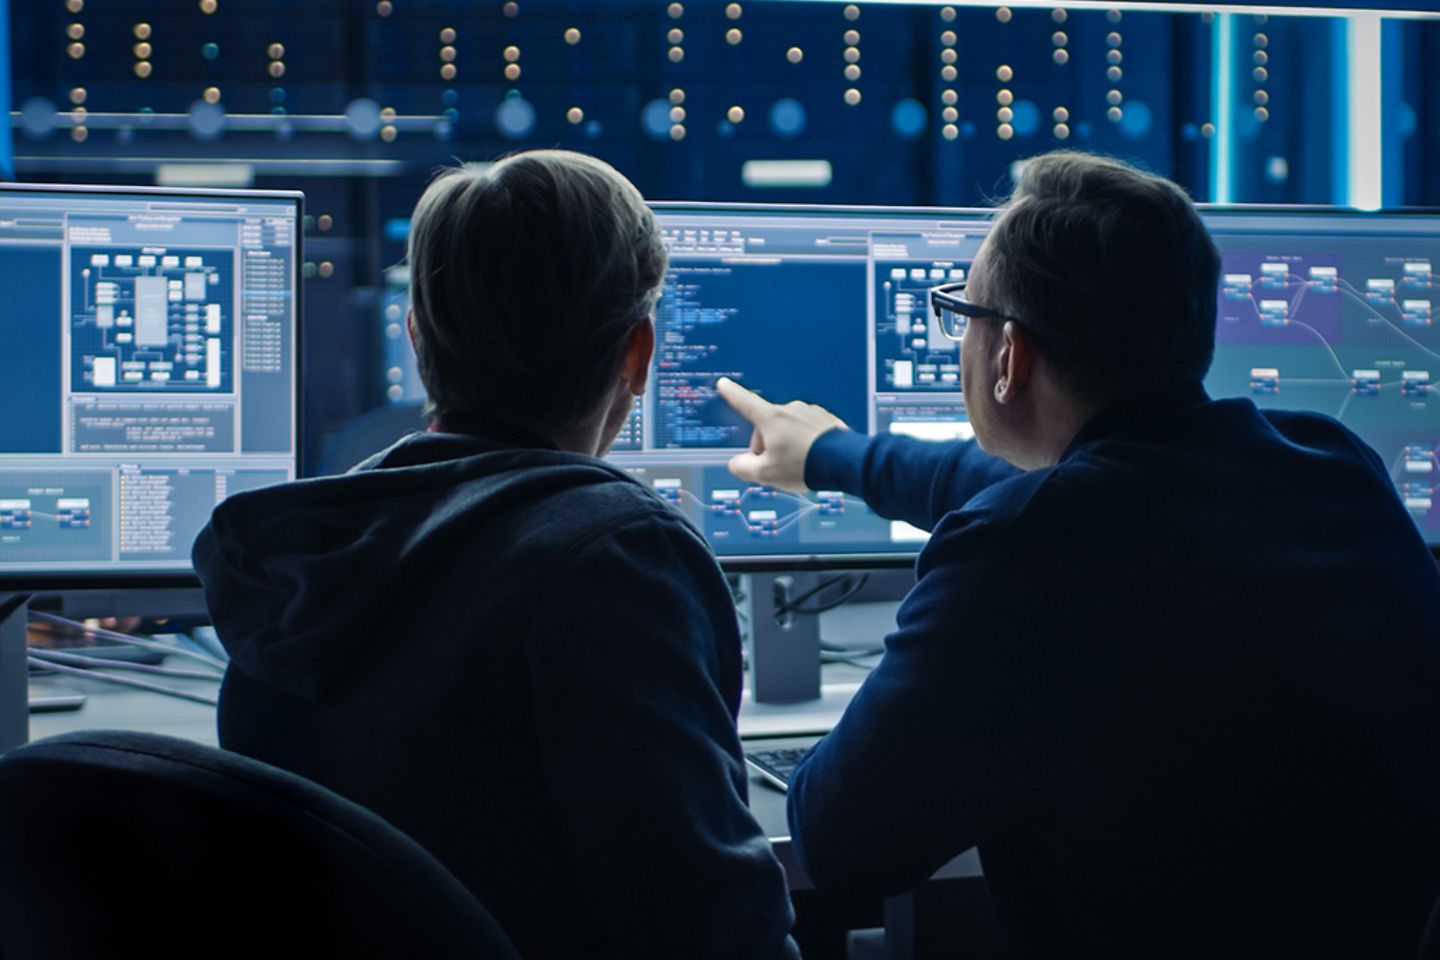 Two men in front of two large monitors discussing data